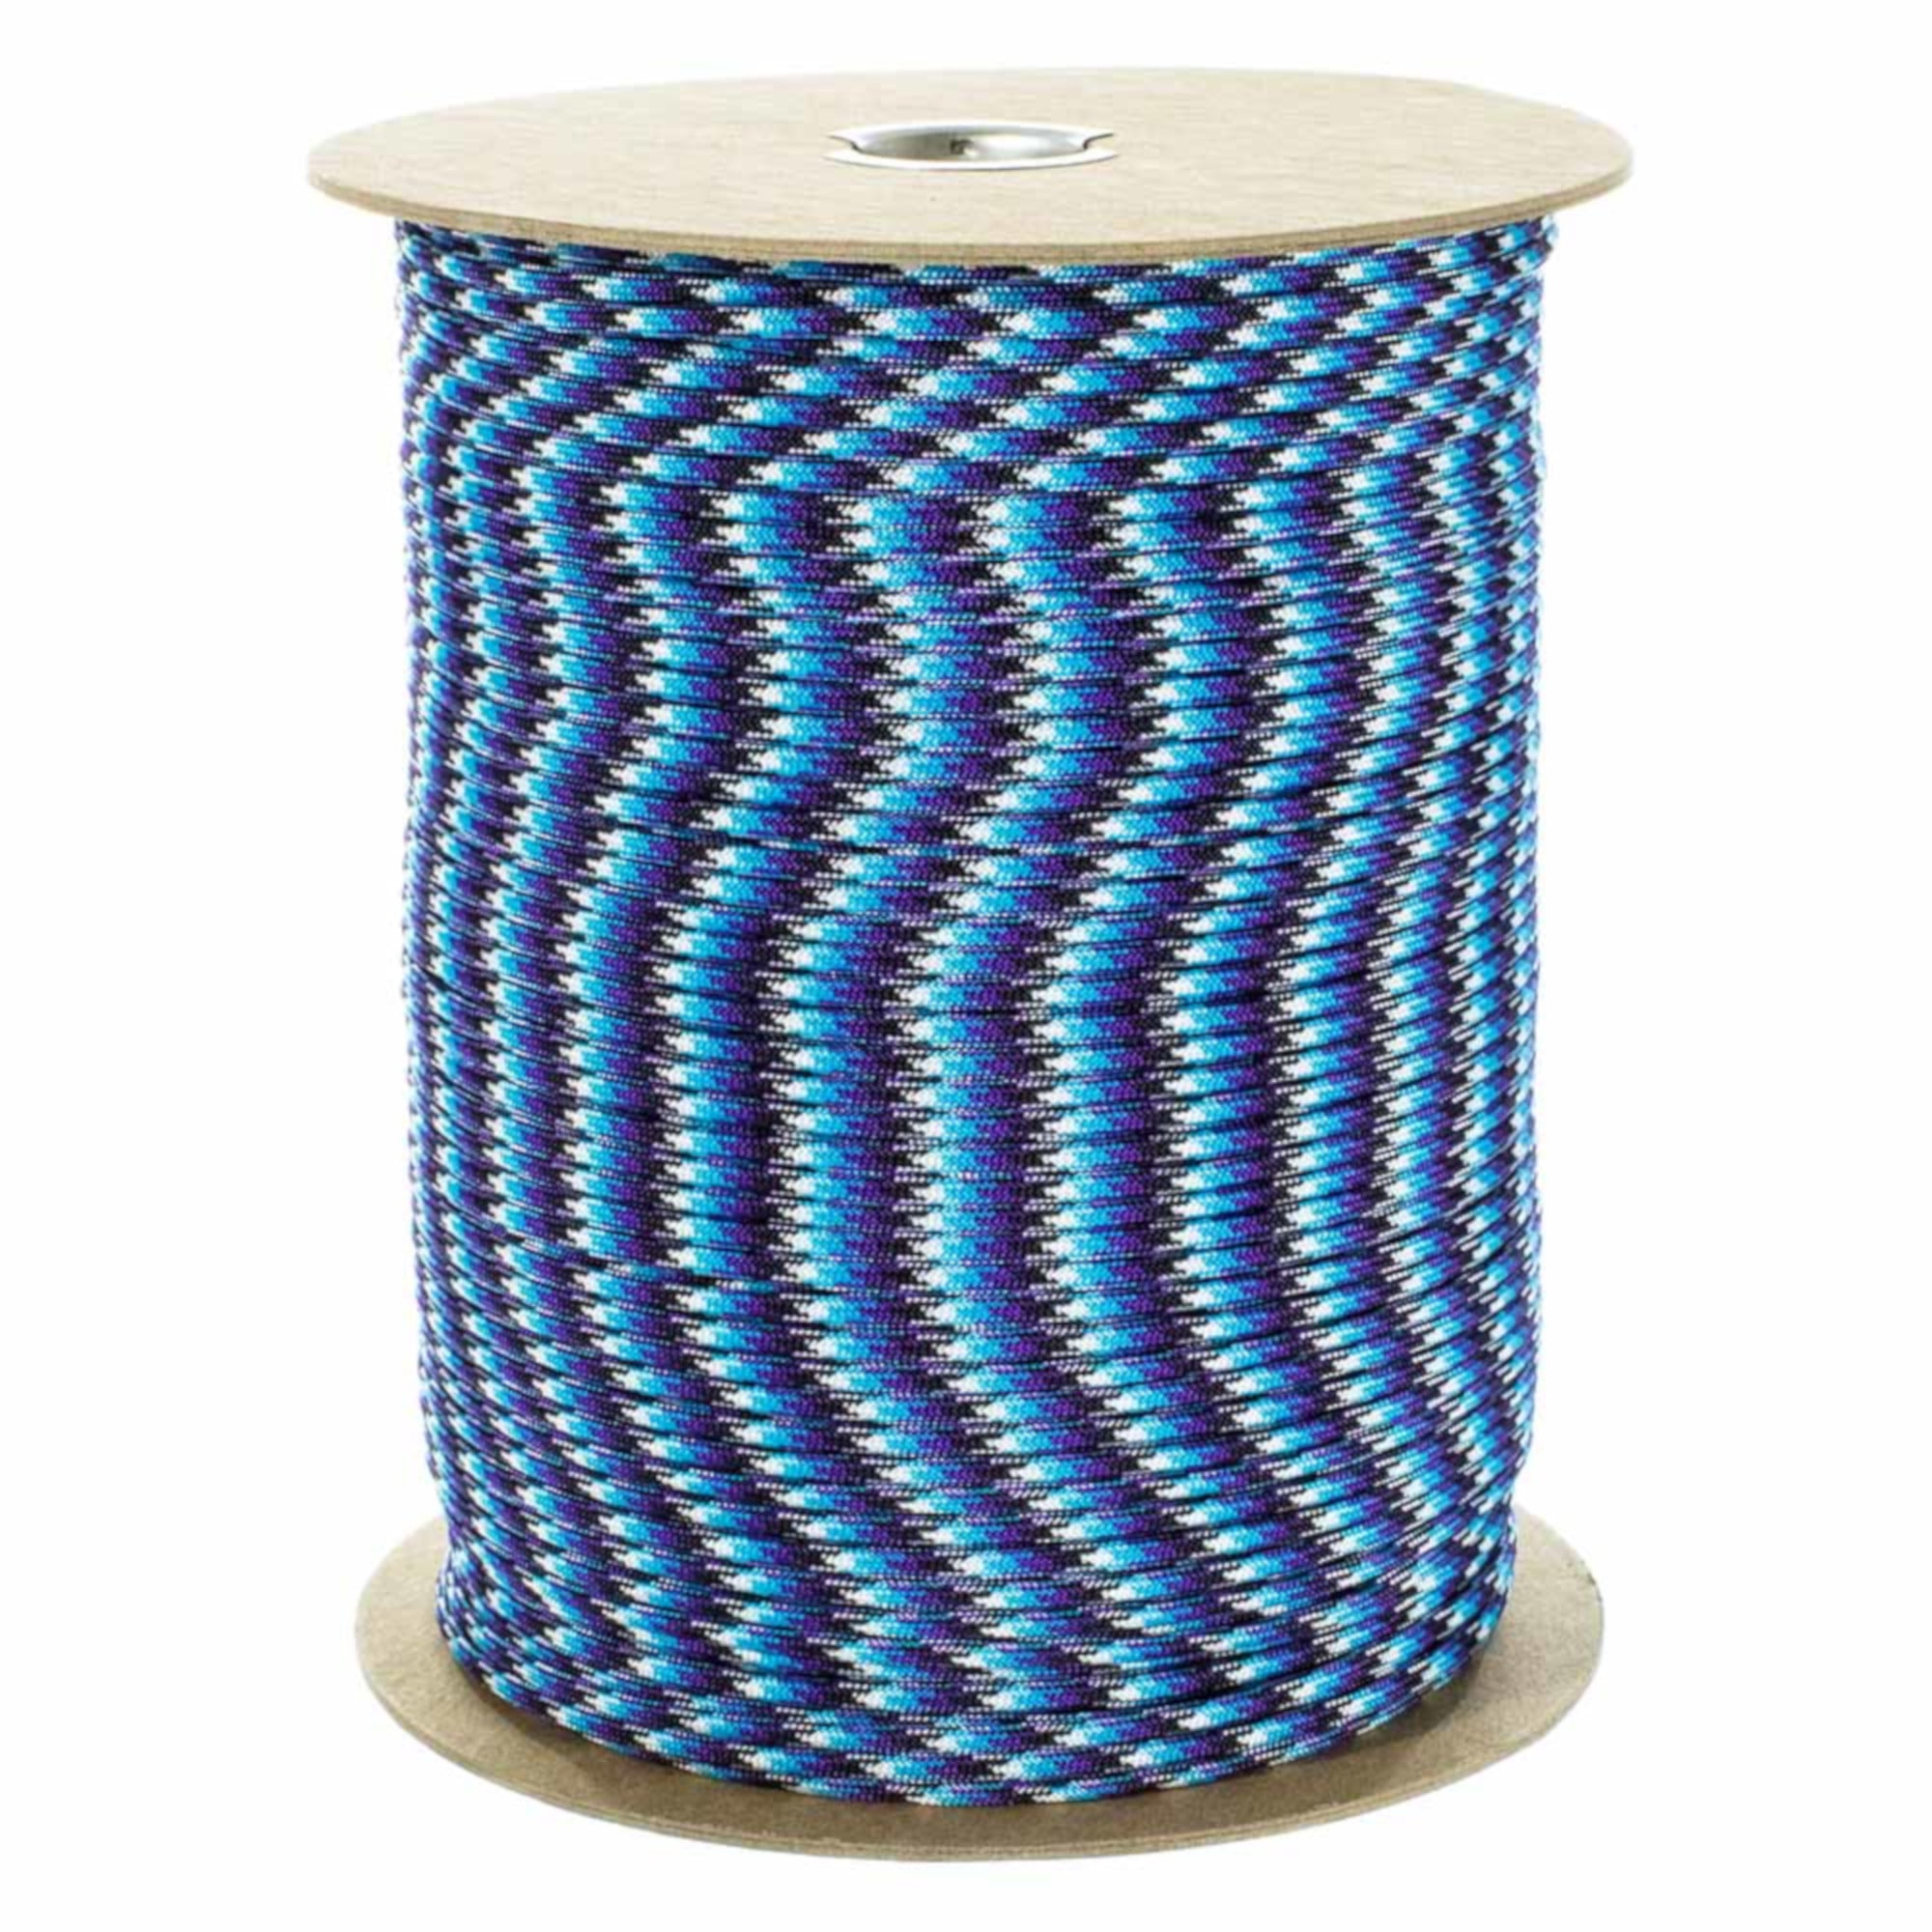 PARACORD PLANET 100' Hanks Parachute 550 Cord Type III 7 Strand Paracord Top 40 Most Popular Colors 